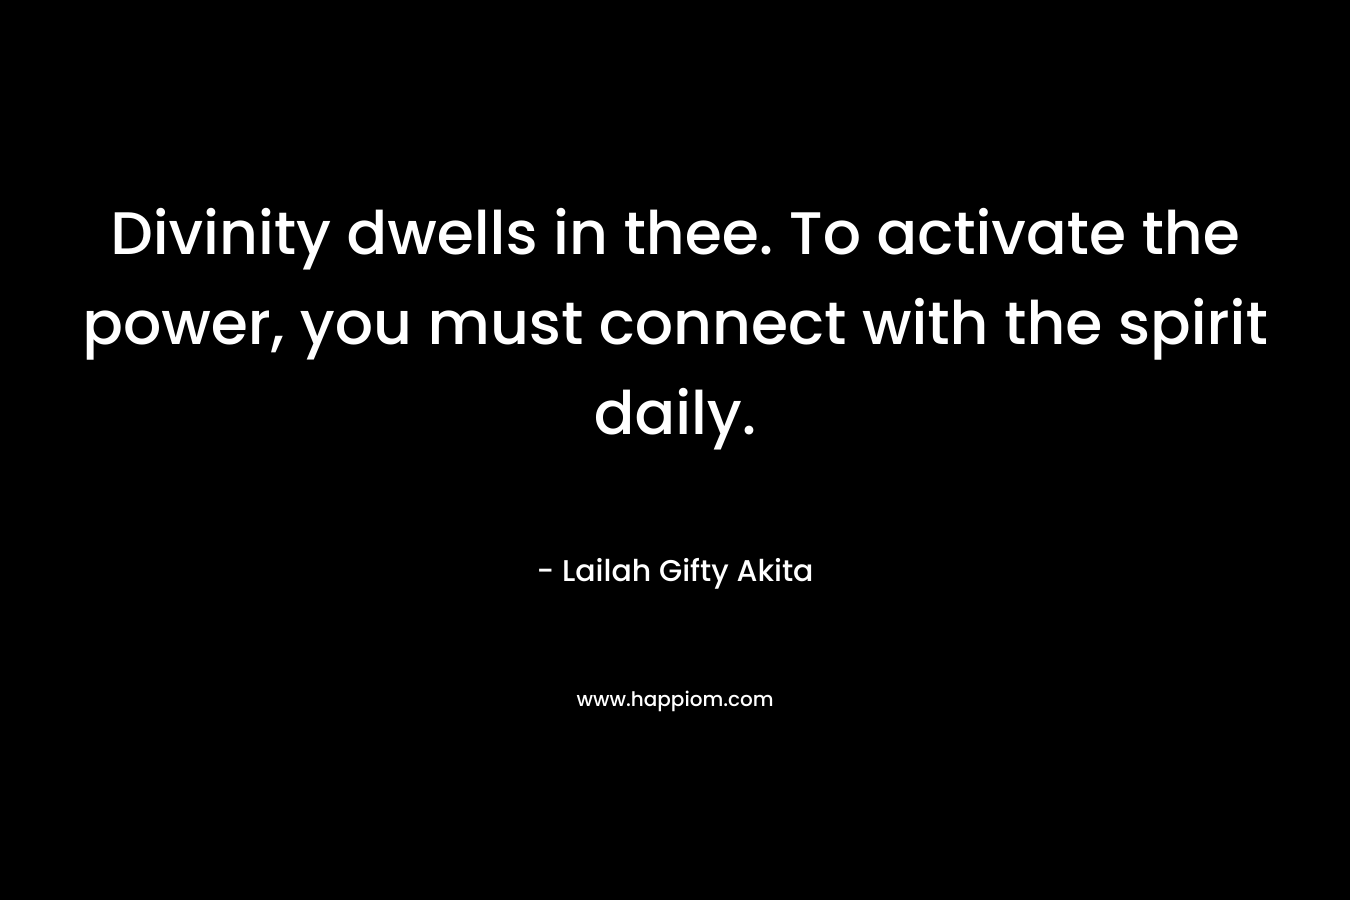 Divinity dwells in thee. To activate the power, you must connect with the spirit daily. – Lailah Gifty Akita